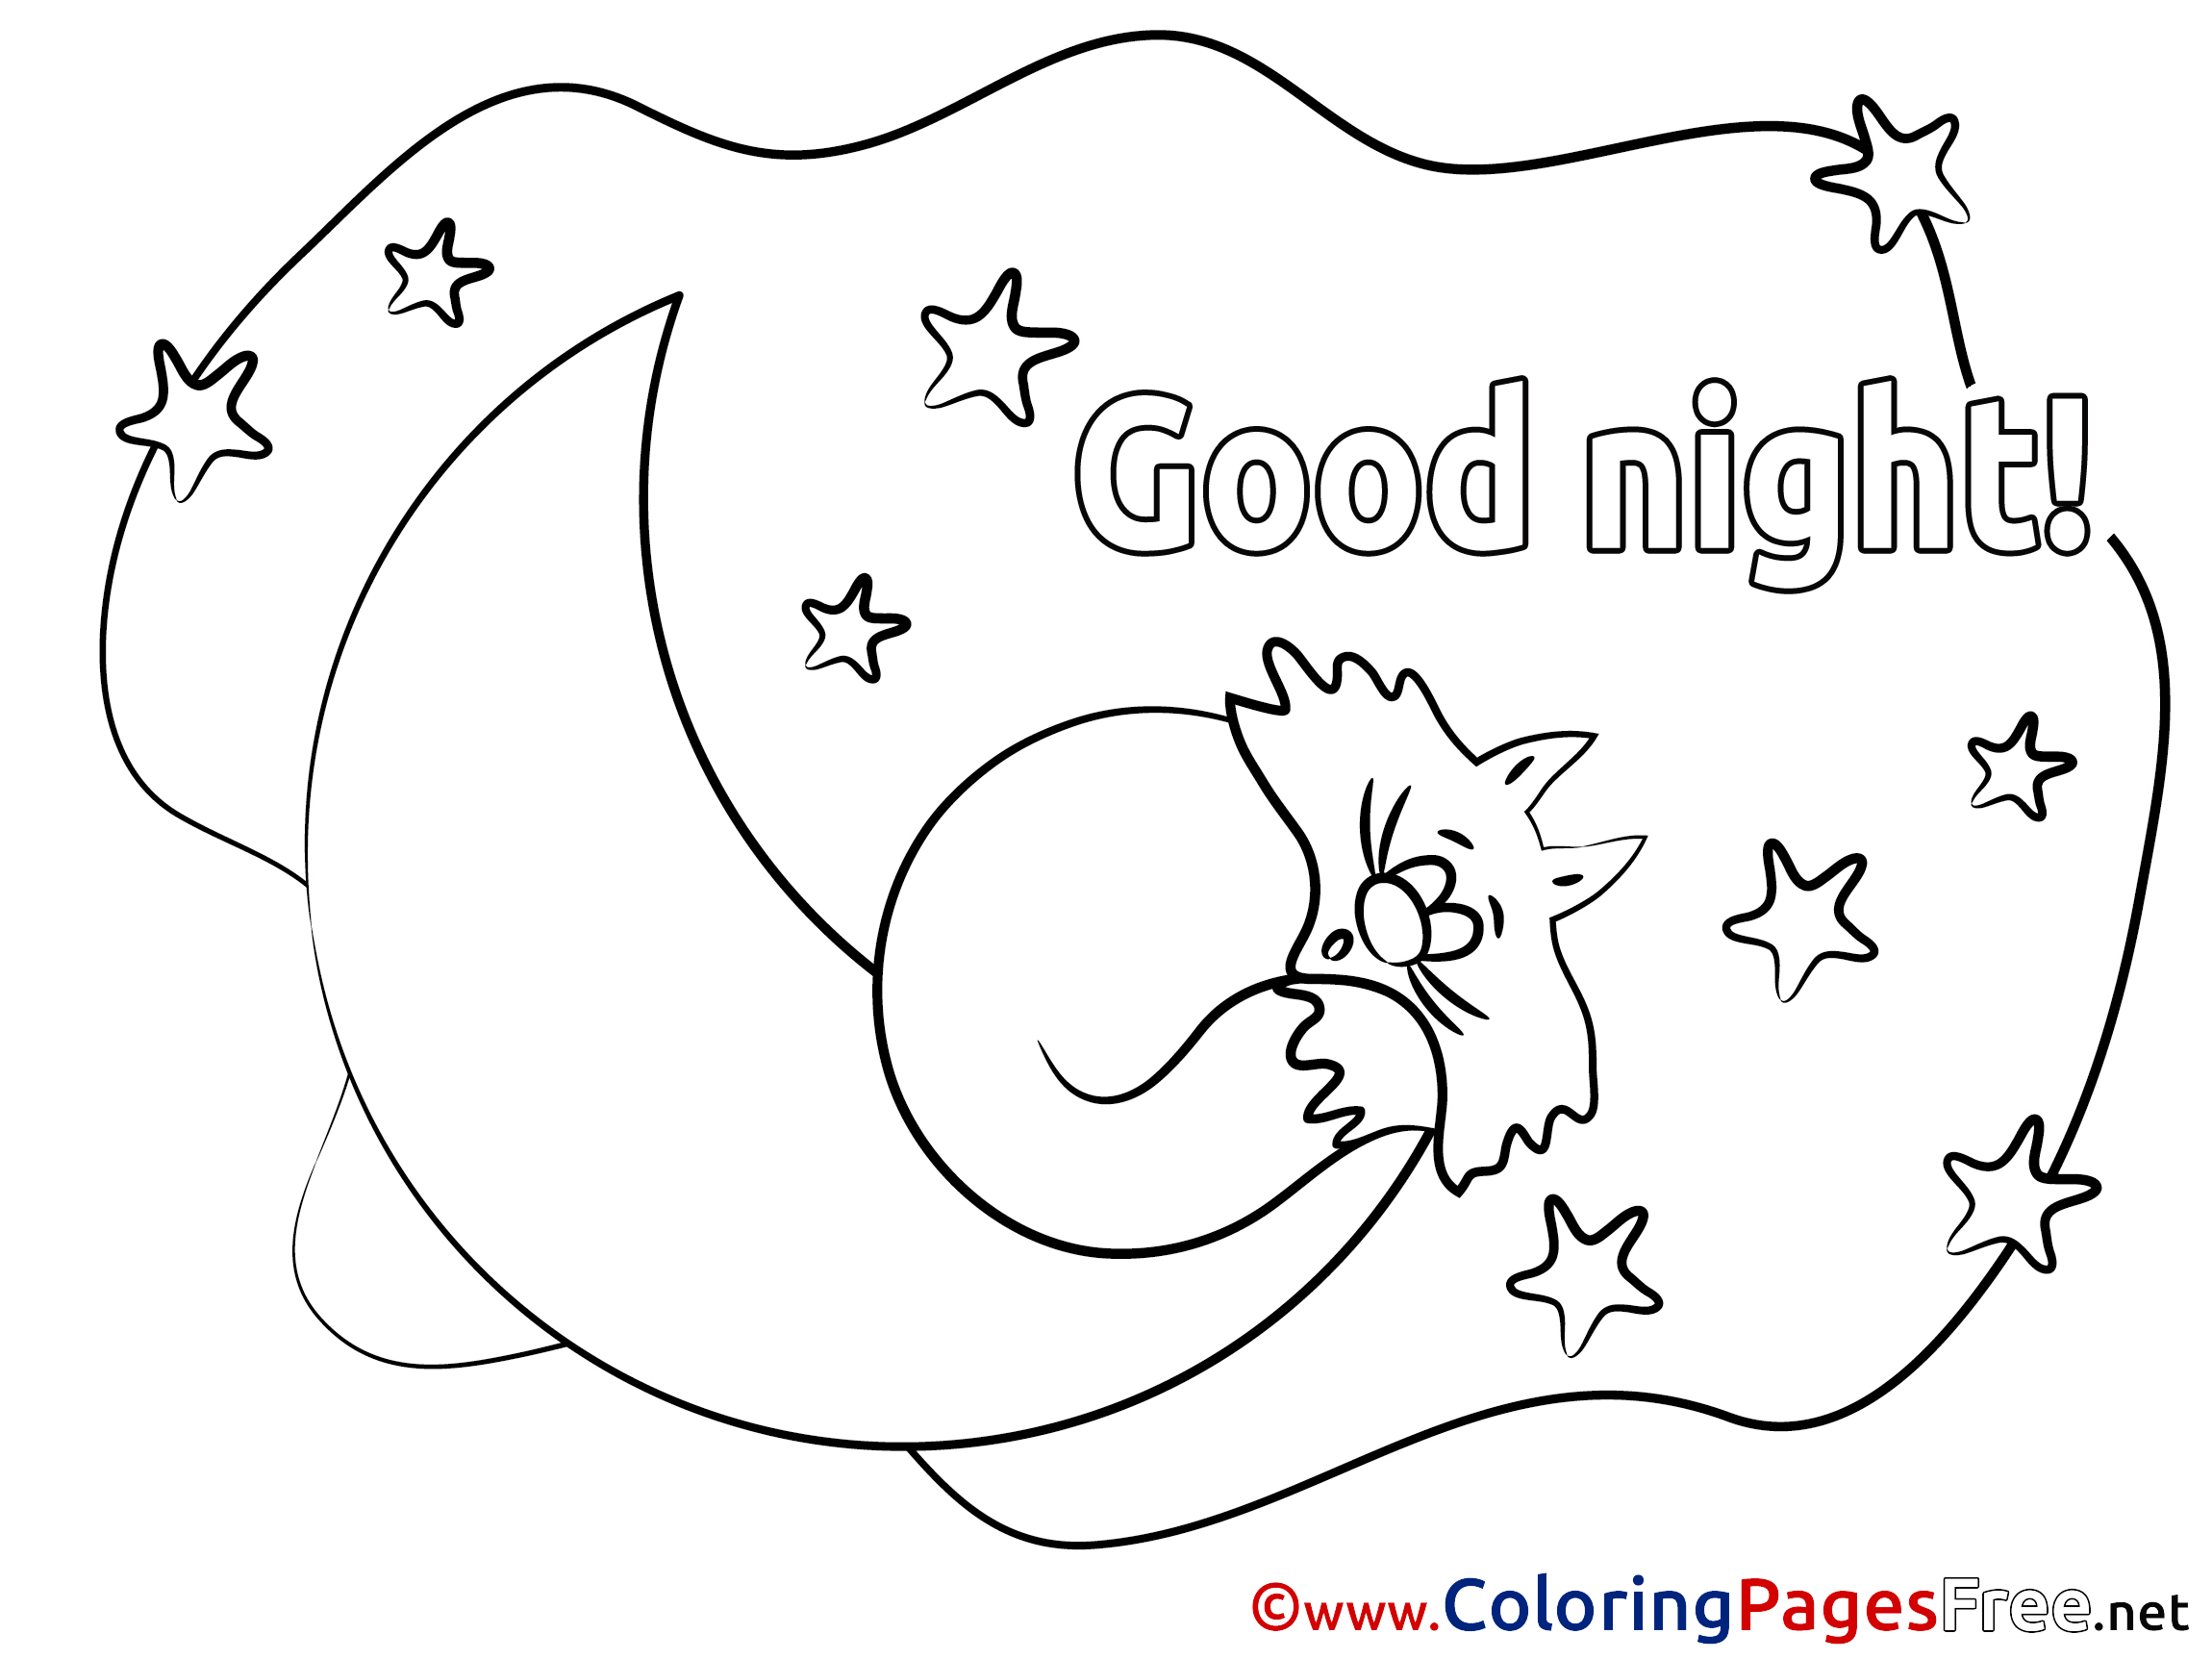 Goodnight Moon Coloring Page